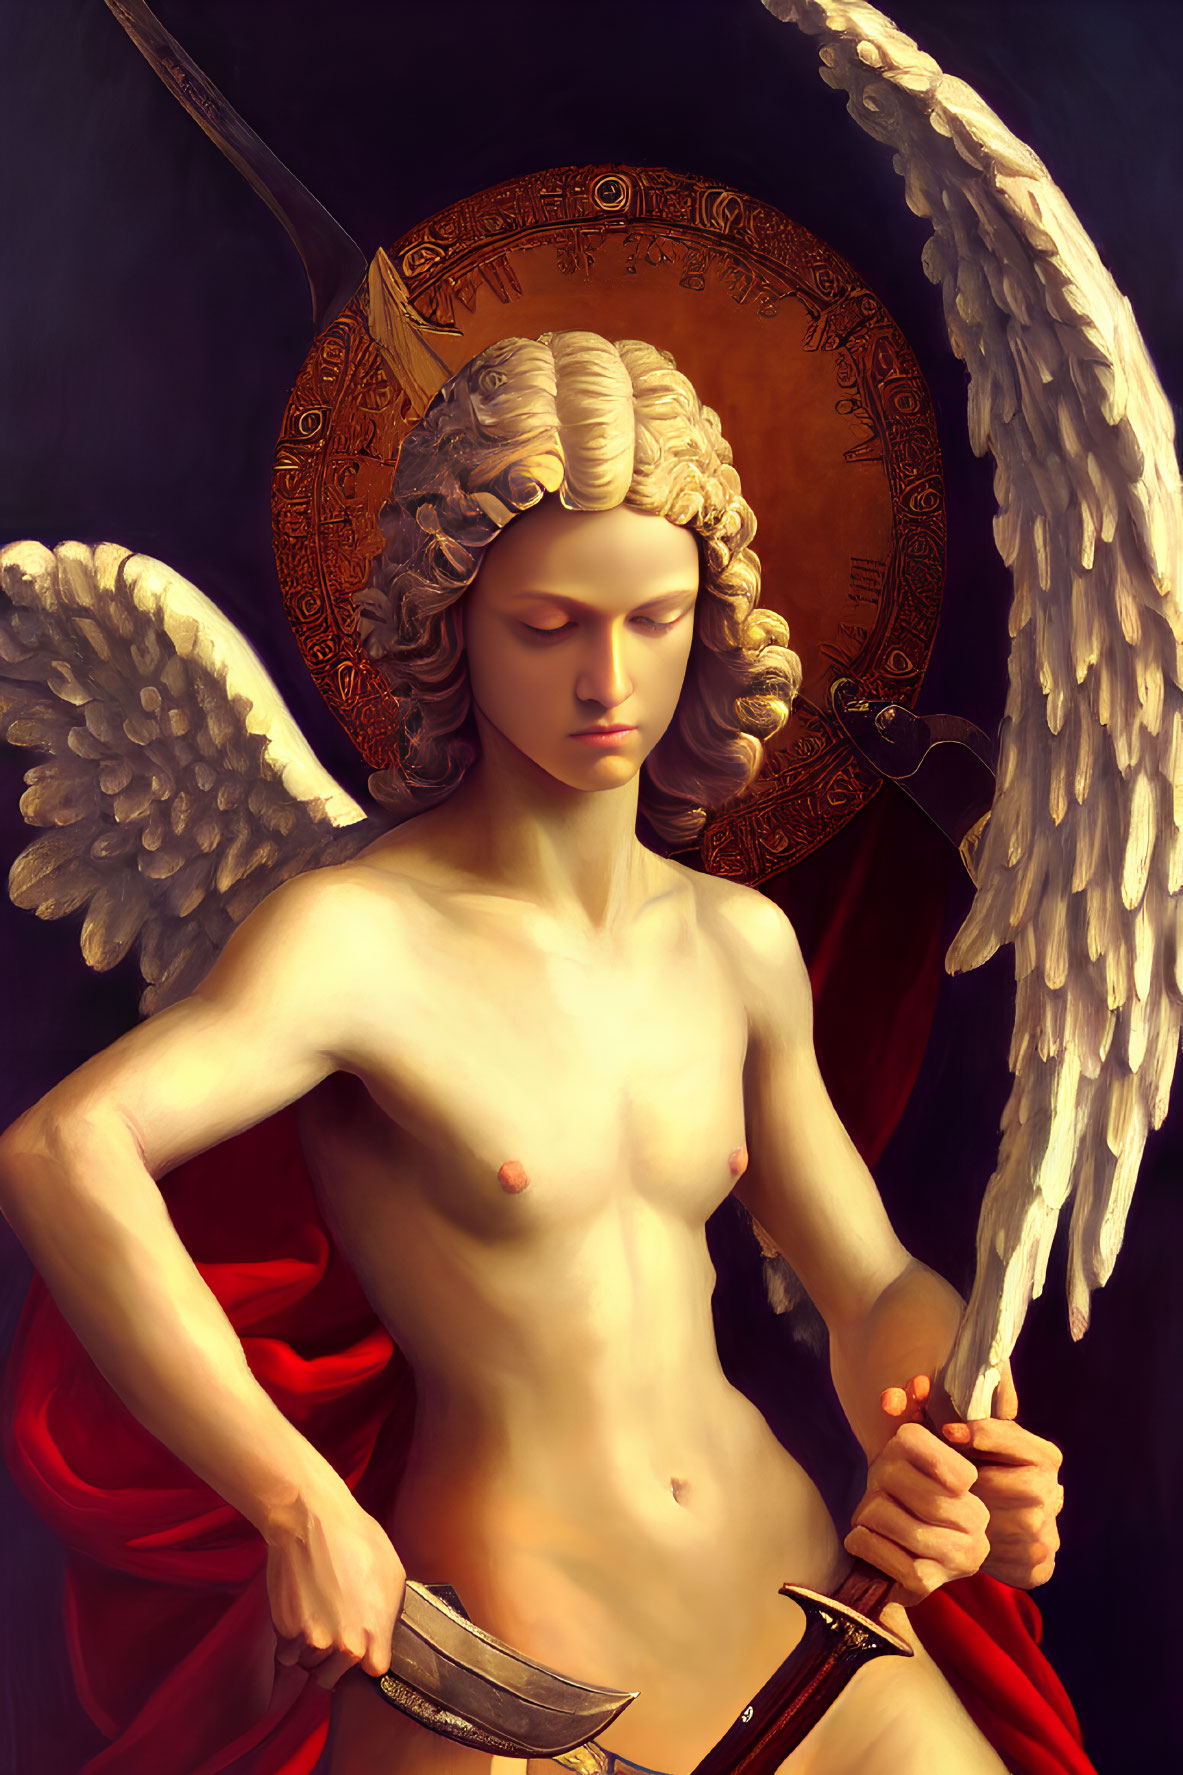 White-winged angel with golden halo and sword in red drape on dark background